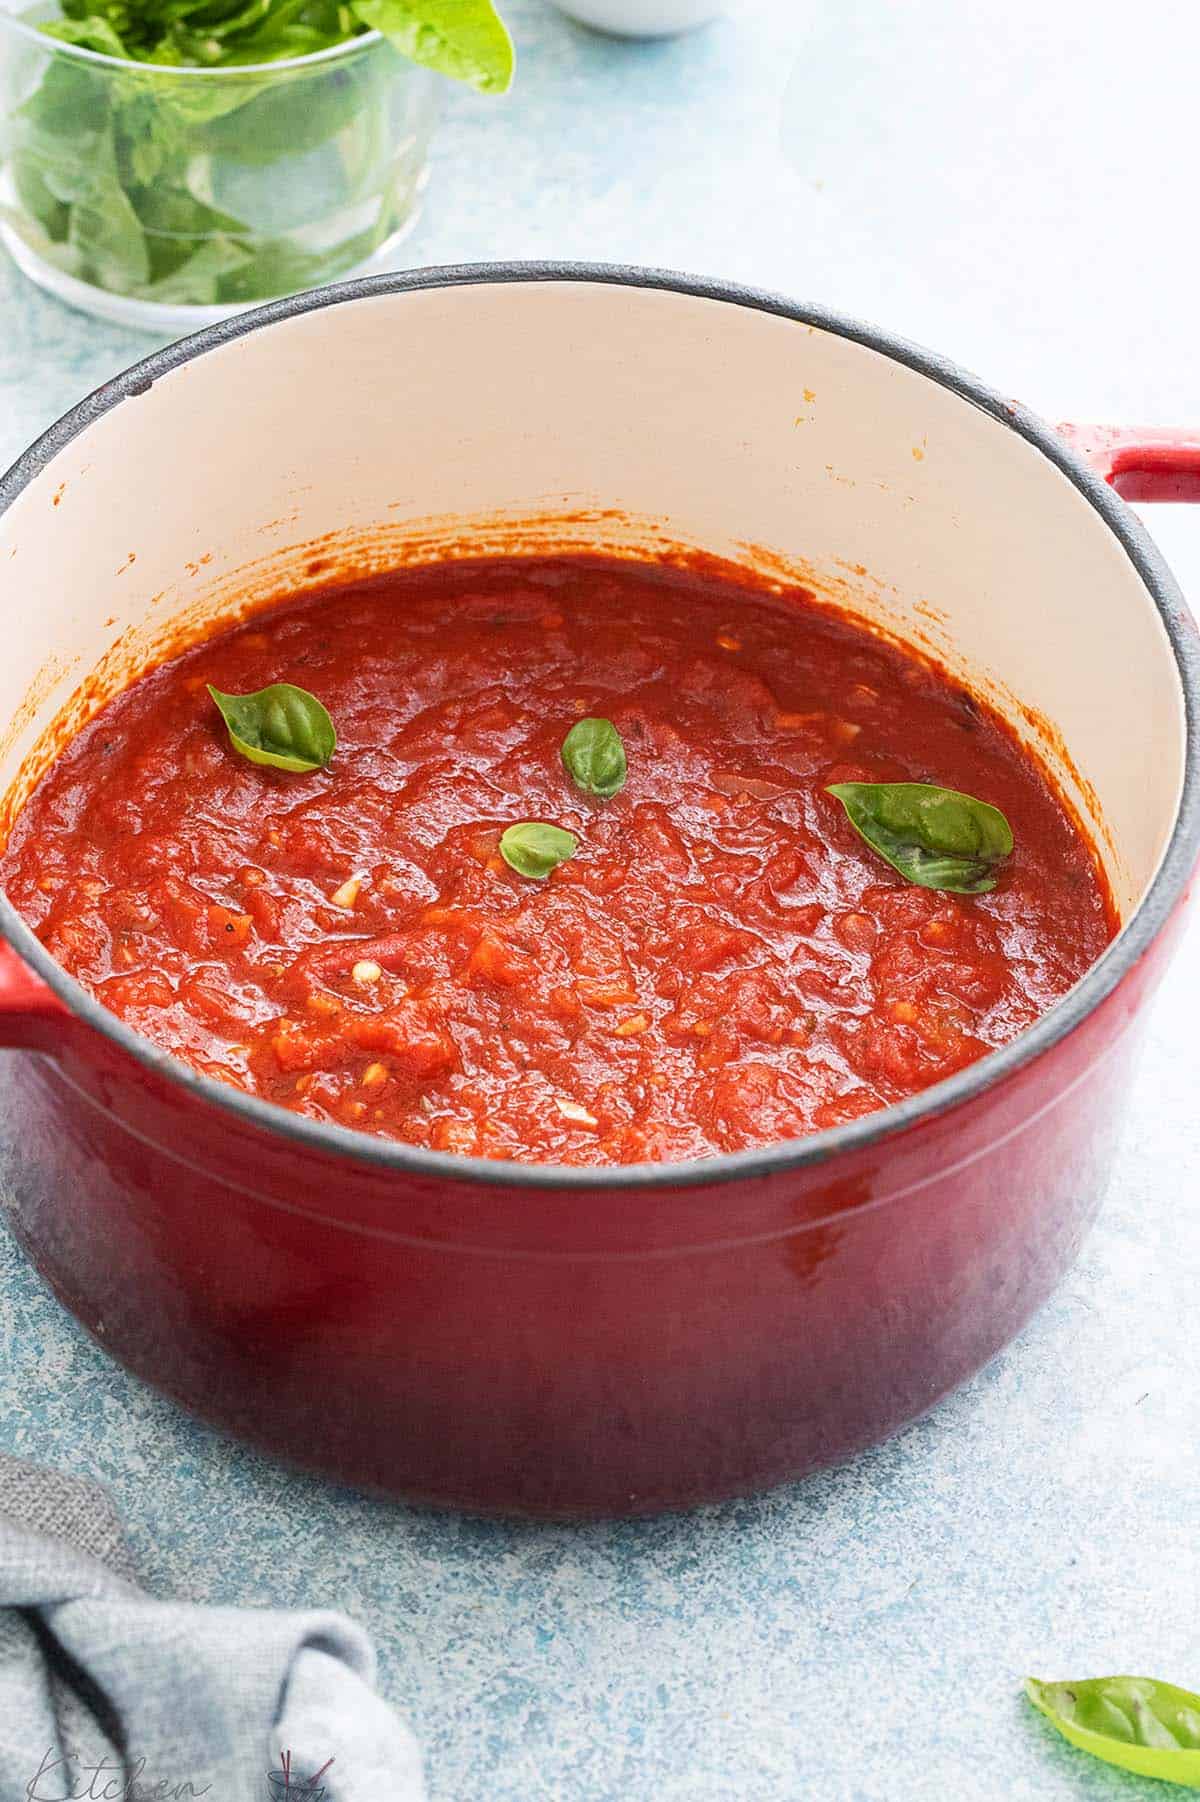 white pan with red handles, filled with red sauce and garnished with basil leaves.